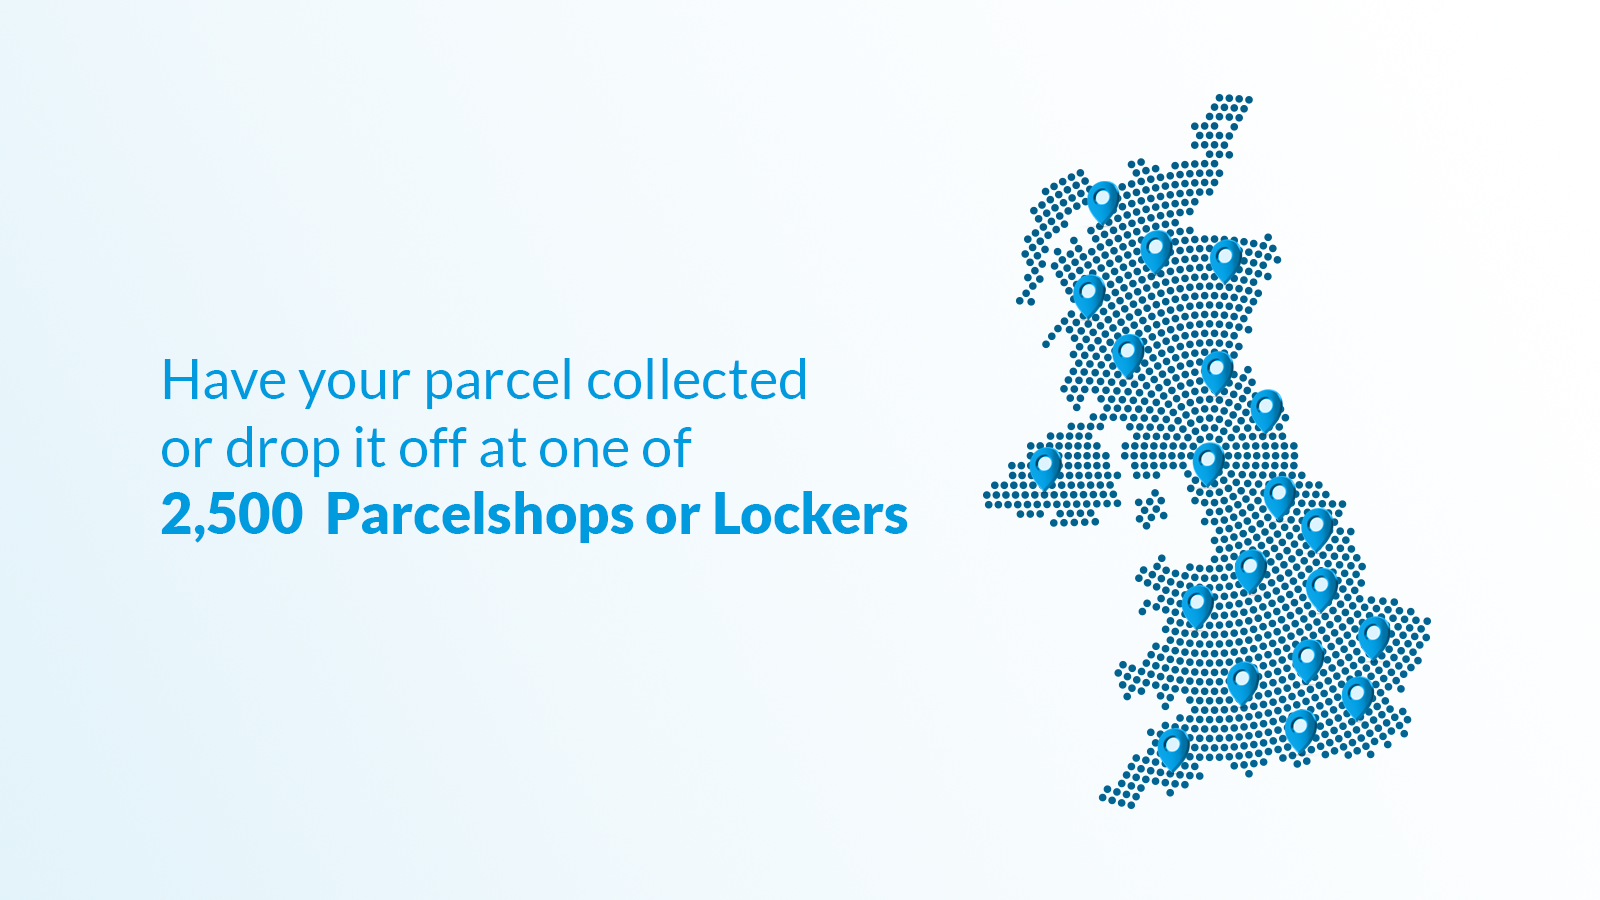 Have your parcel collected or drop it off at one of 2,500 drop o